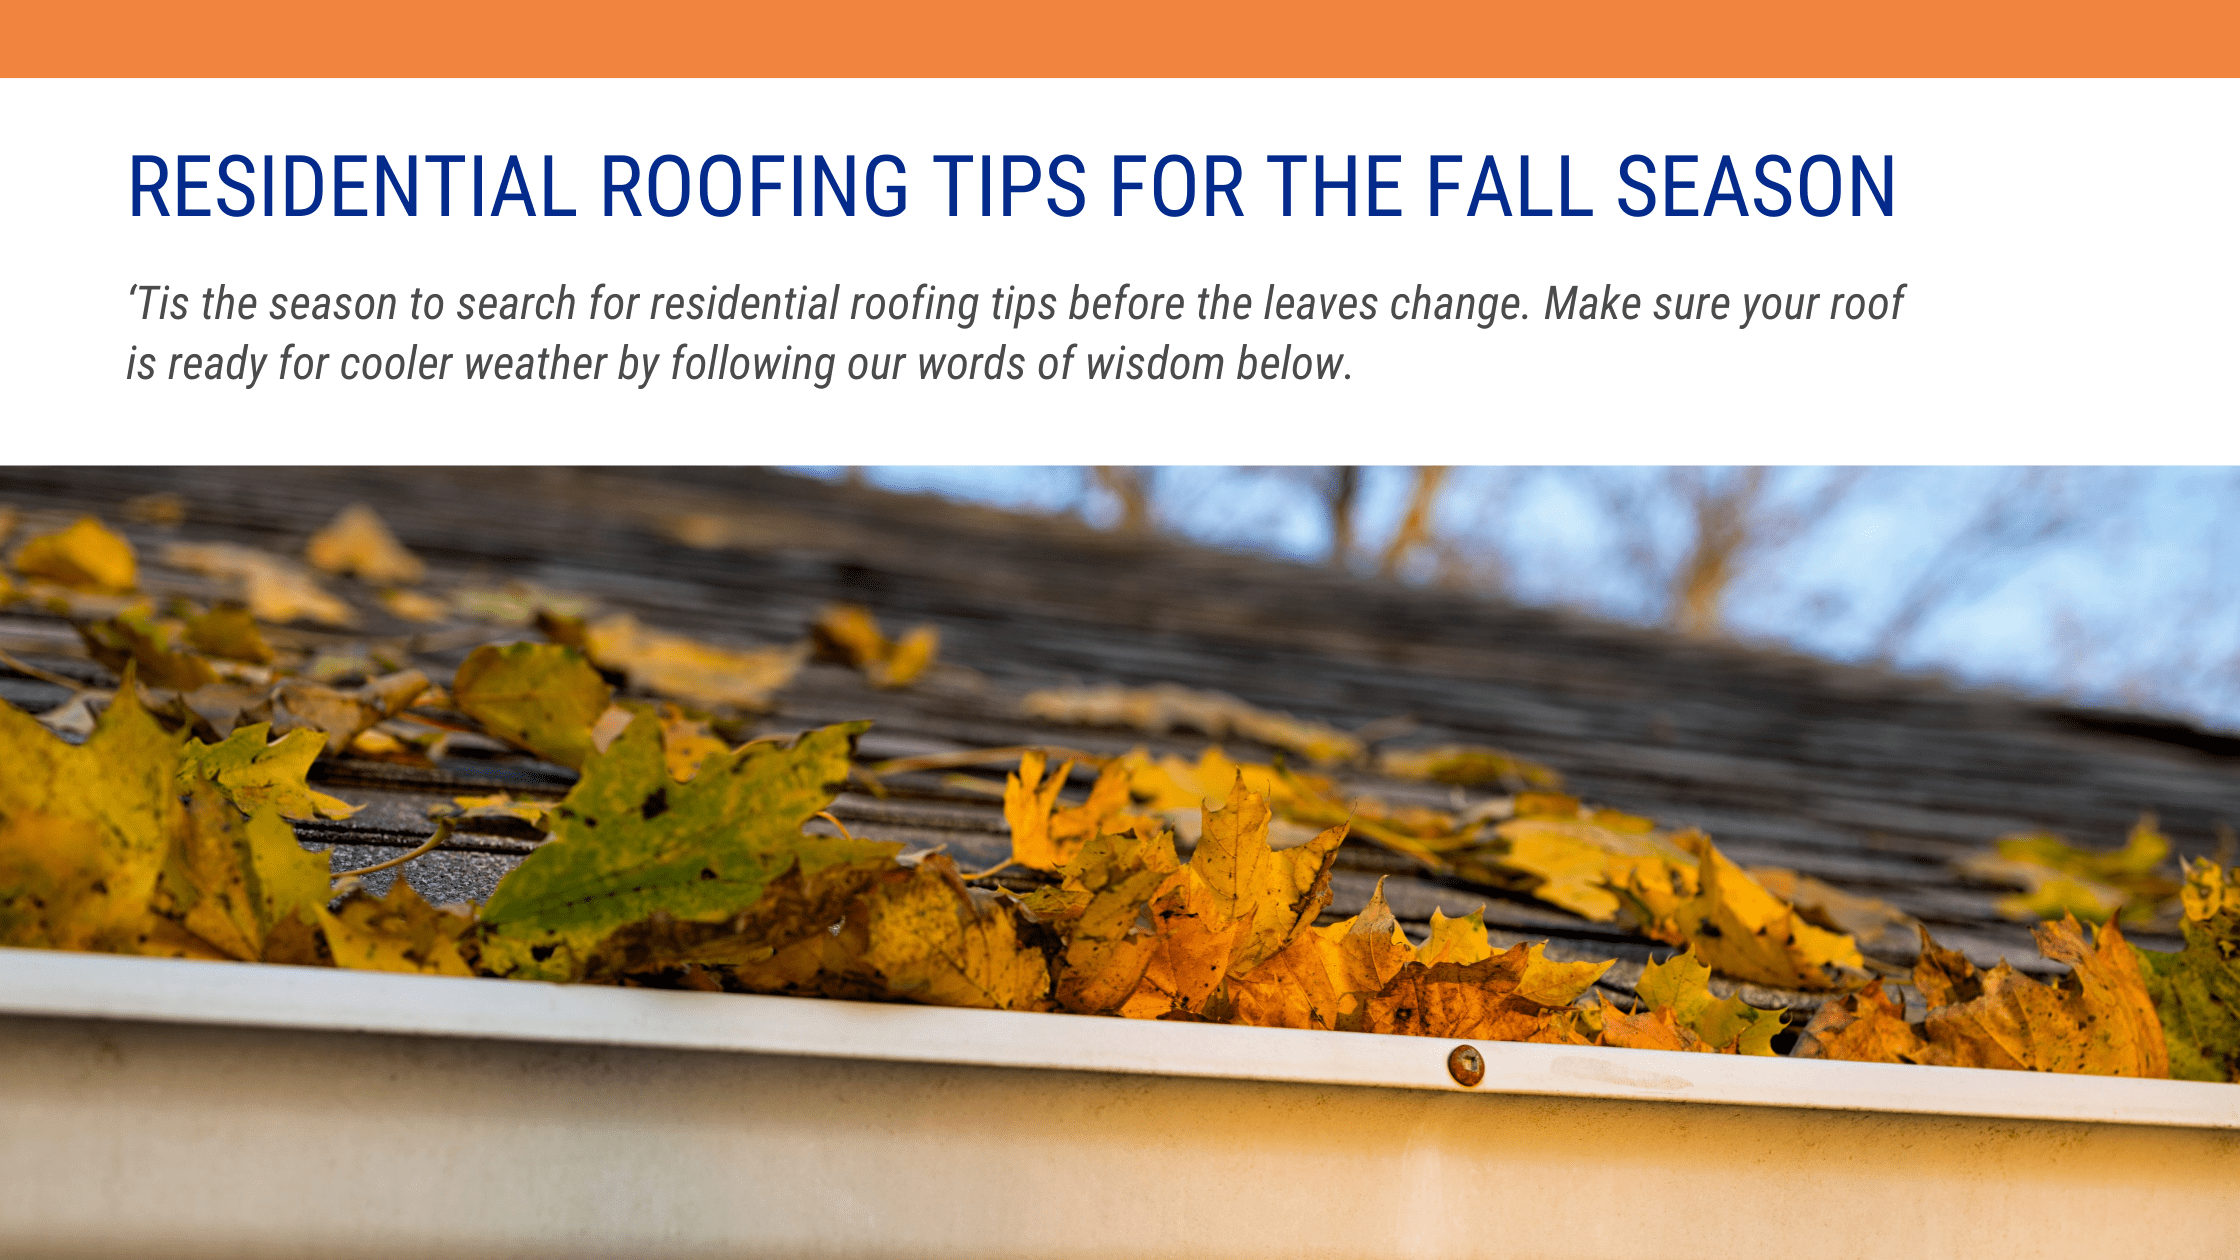 Residential roofing tips